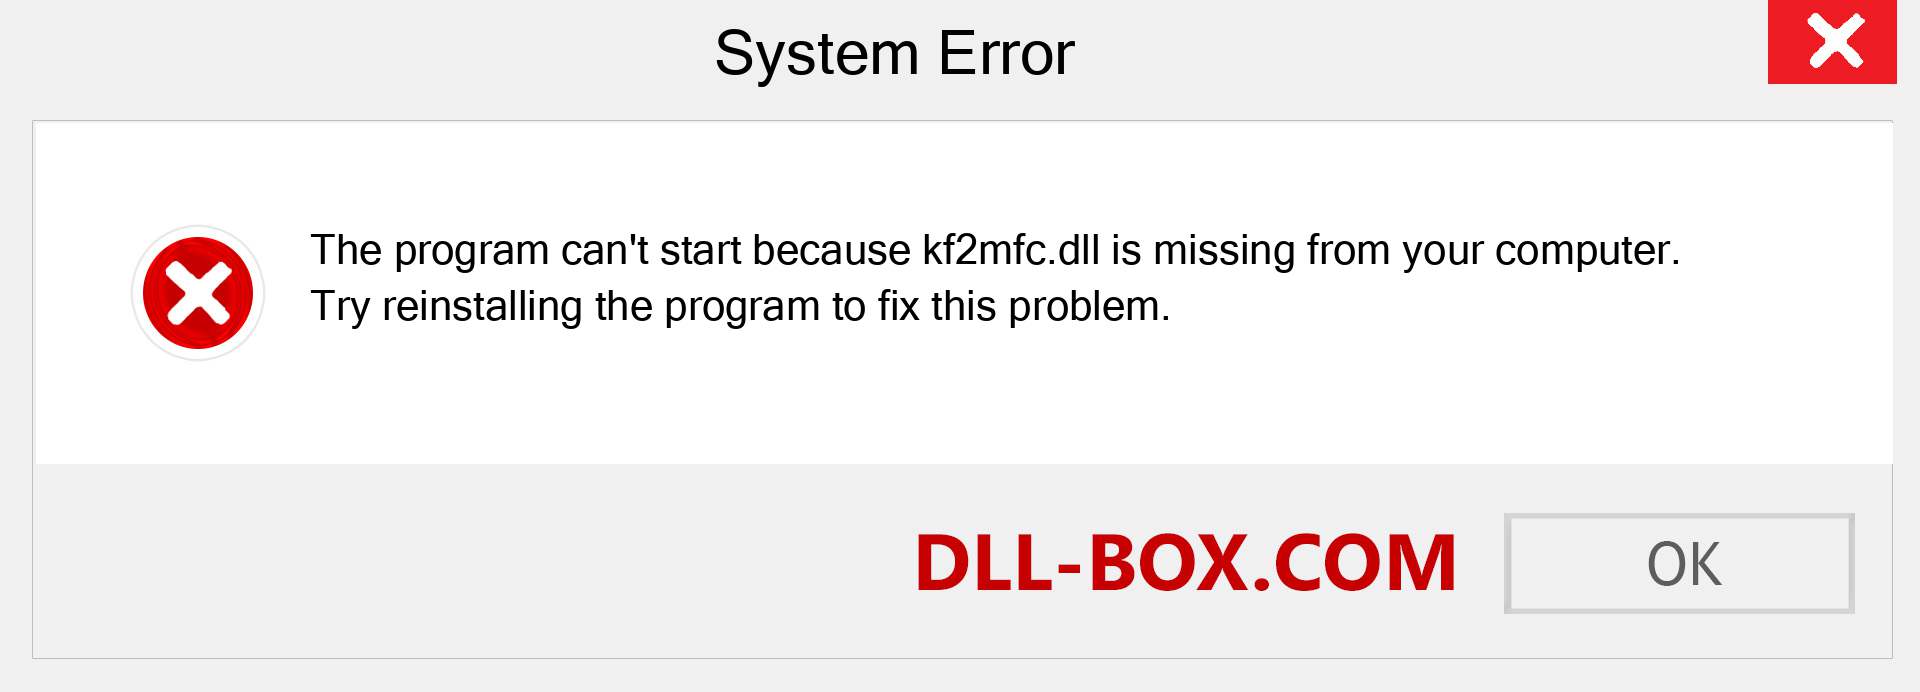  kf2mfc.dll file is missing?. Download for Windows 7, 8, 10 - Fix  kf2mfc dll Missing Error on Windows, photos, images